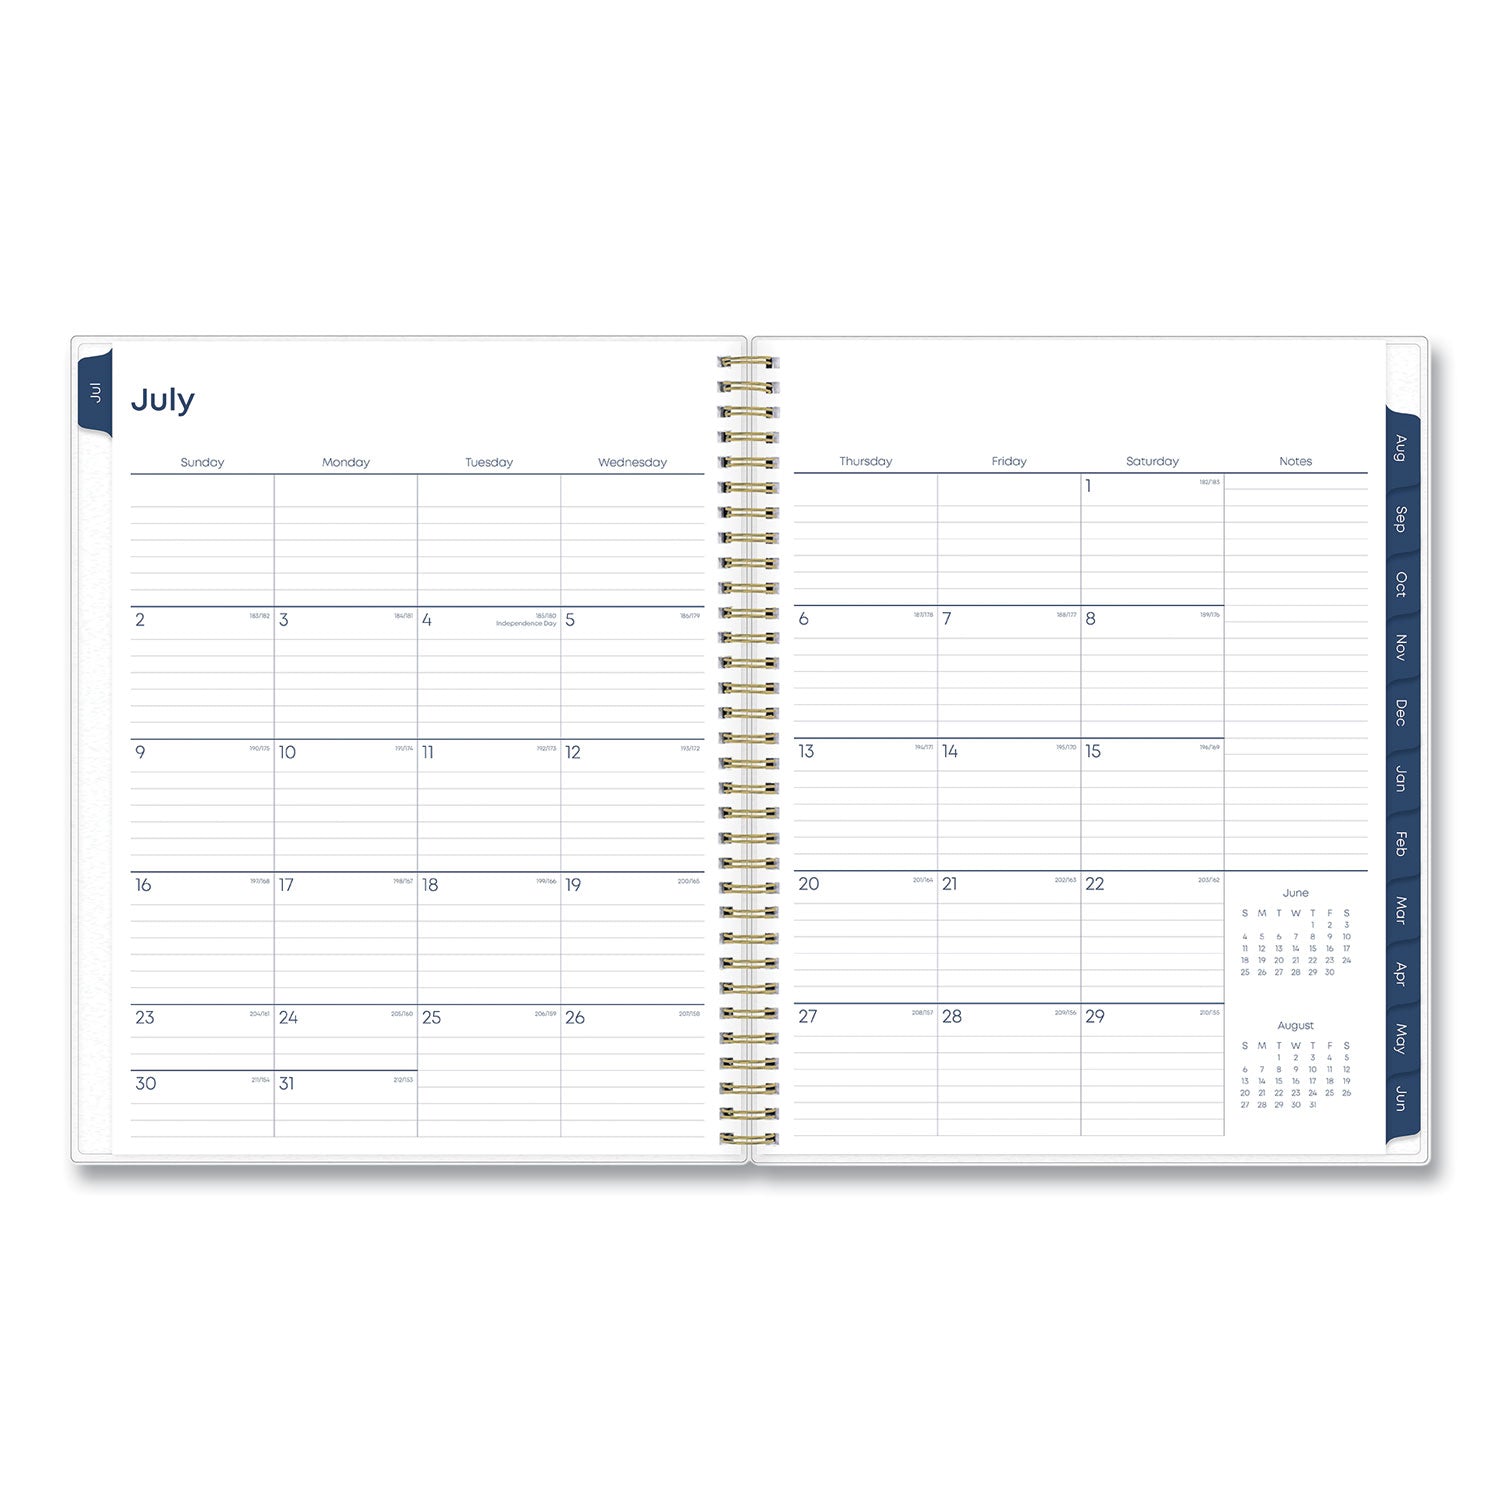 gemma-academic-year-weekly-monthly-planner-geode-artwork-11-x-85-blue-purple-cover-12-month-july-june-2023-2024_bls118177 - 4